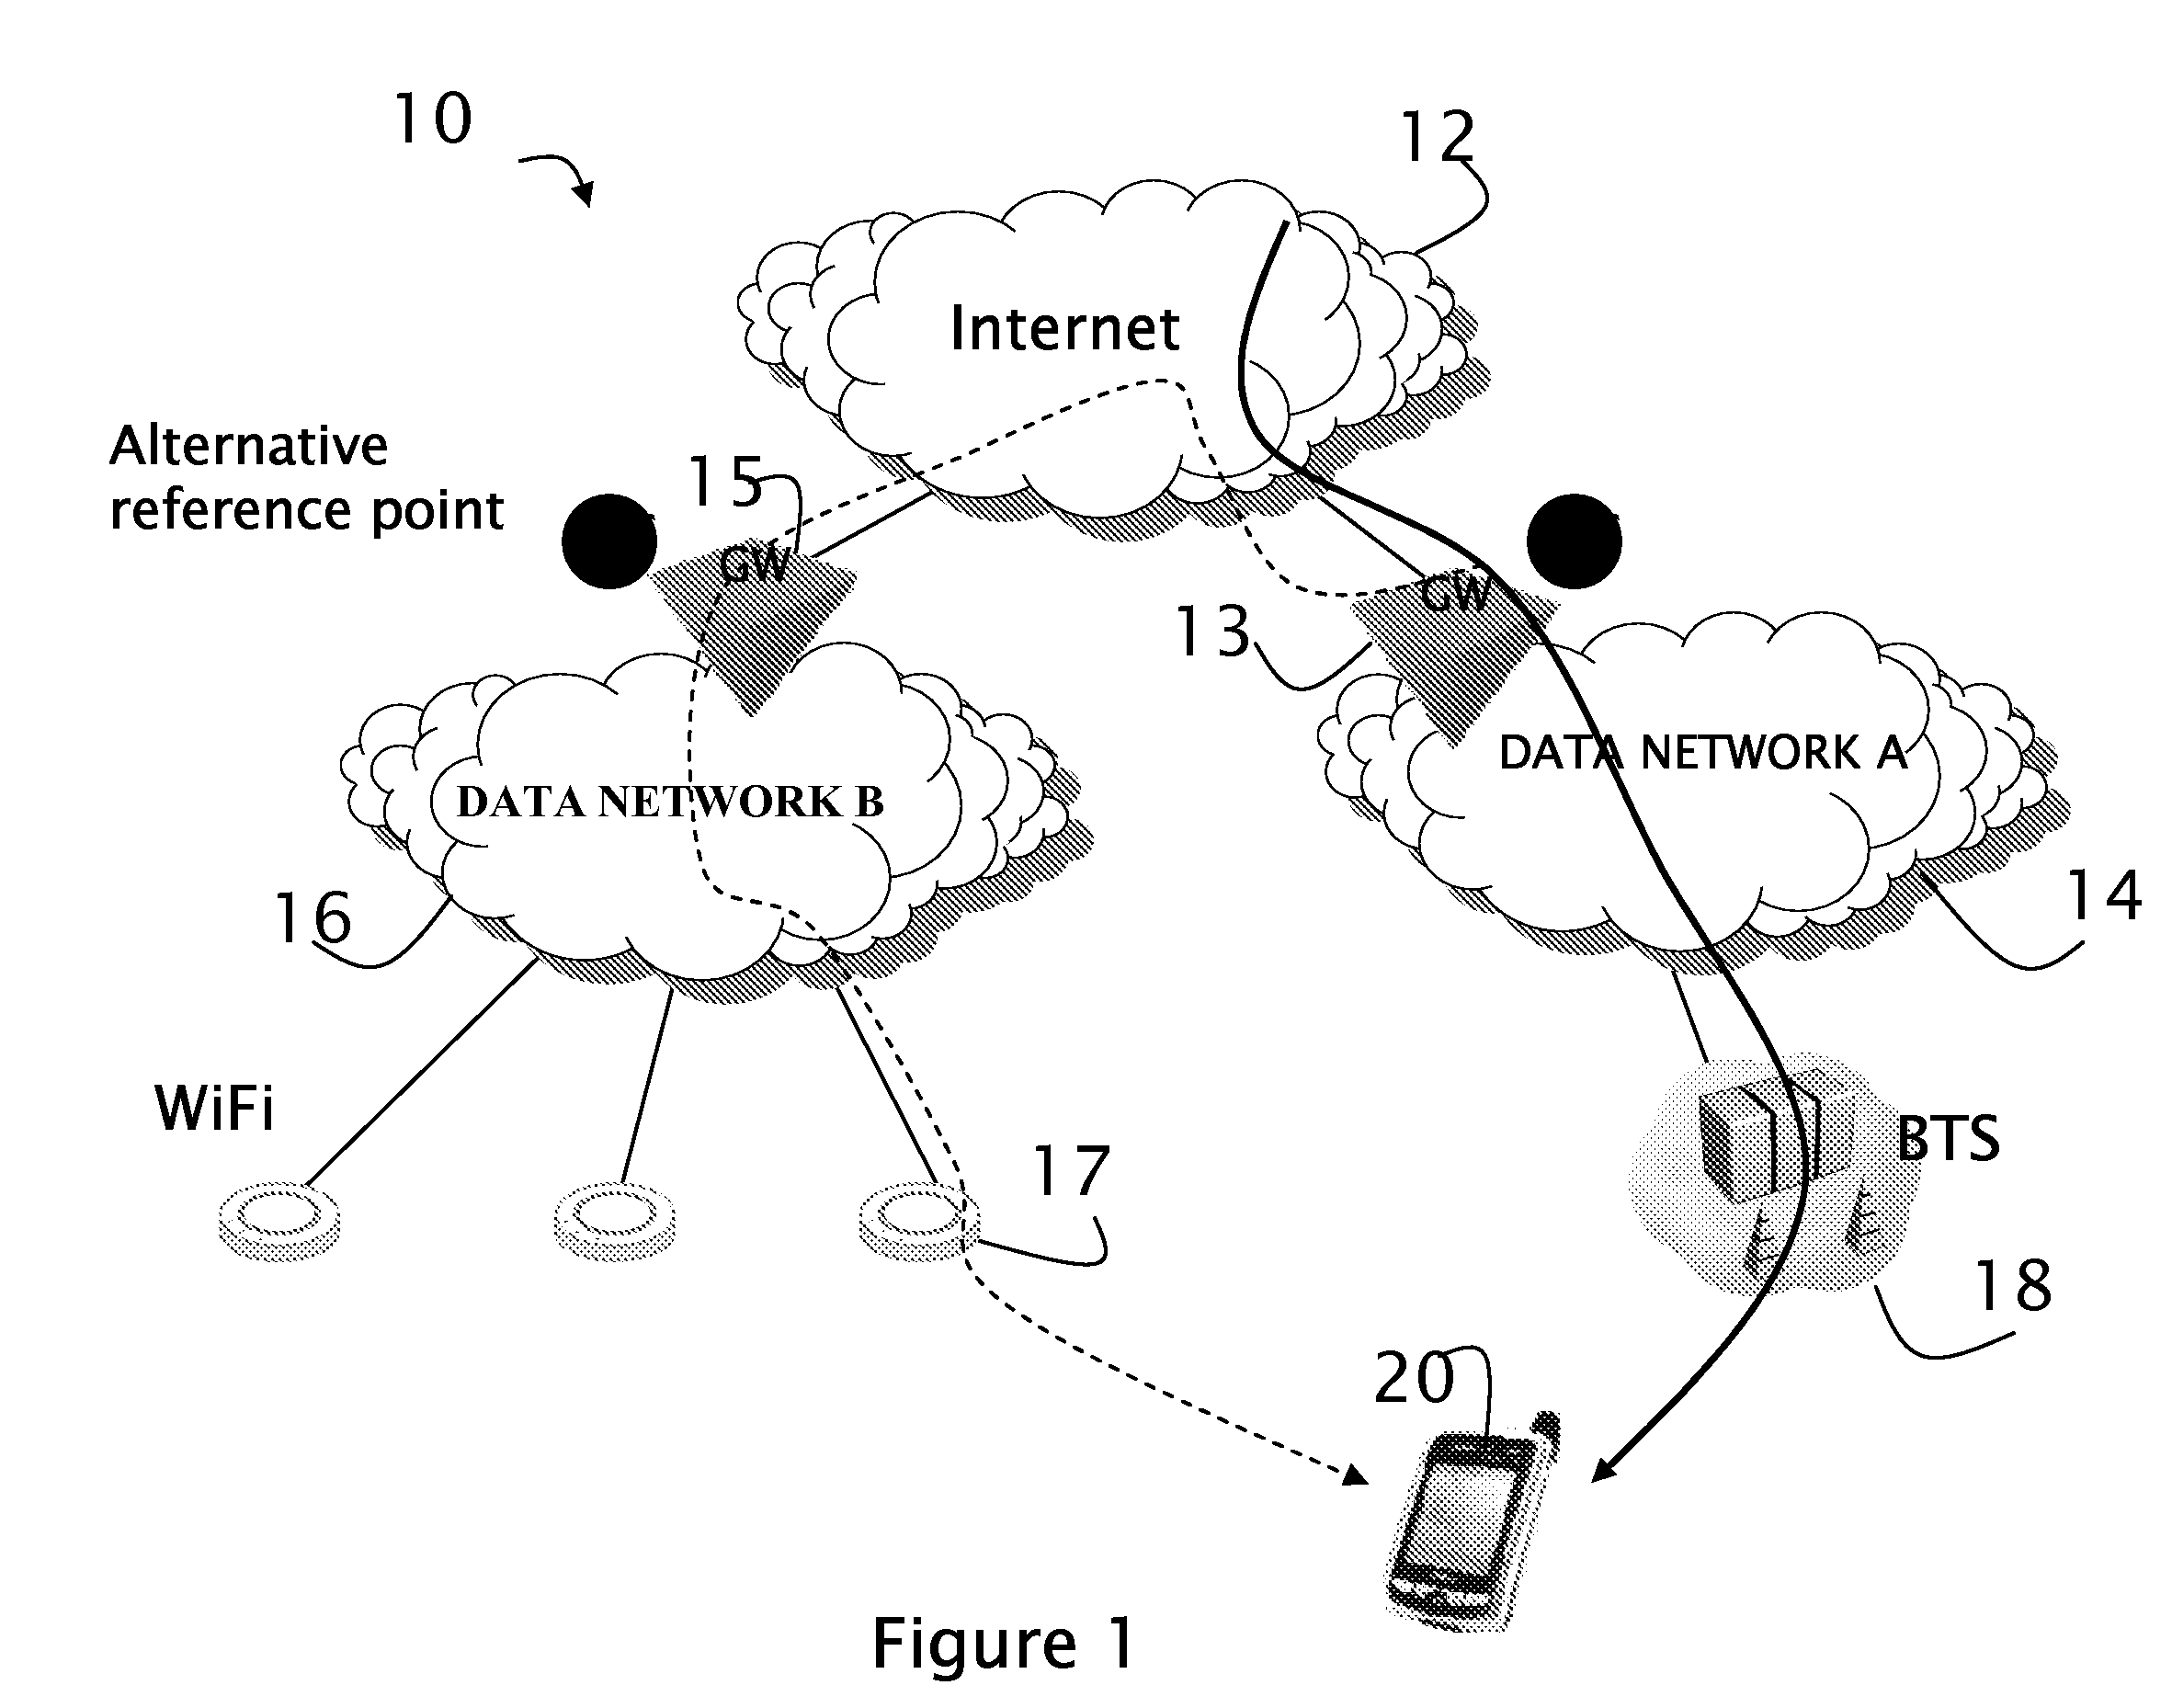 Method and Apparatus for Managing Buffers During Transitions Between Heterogenous Networks